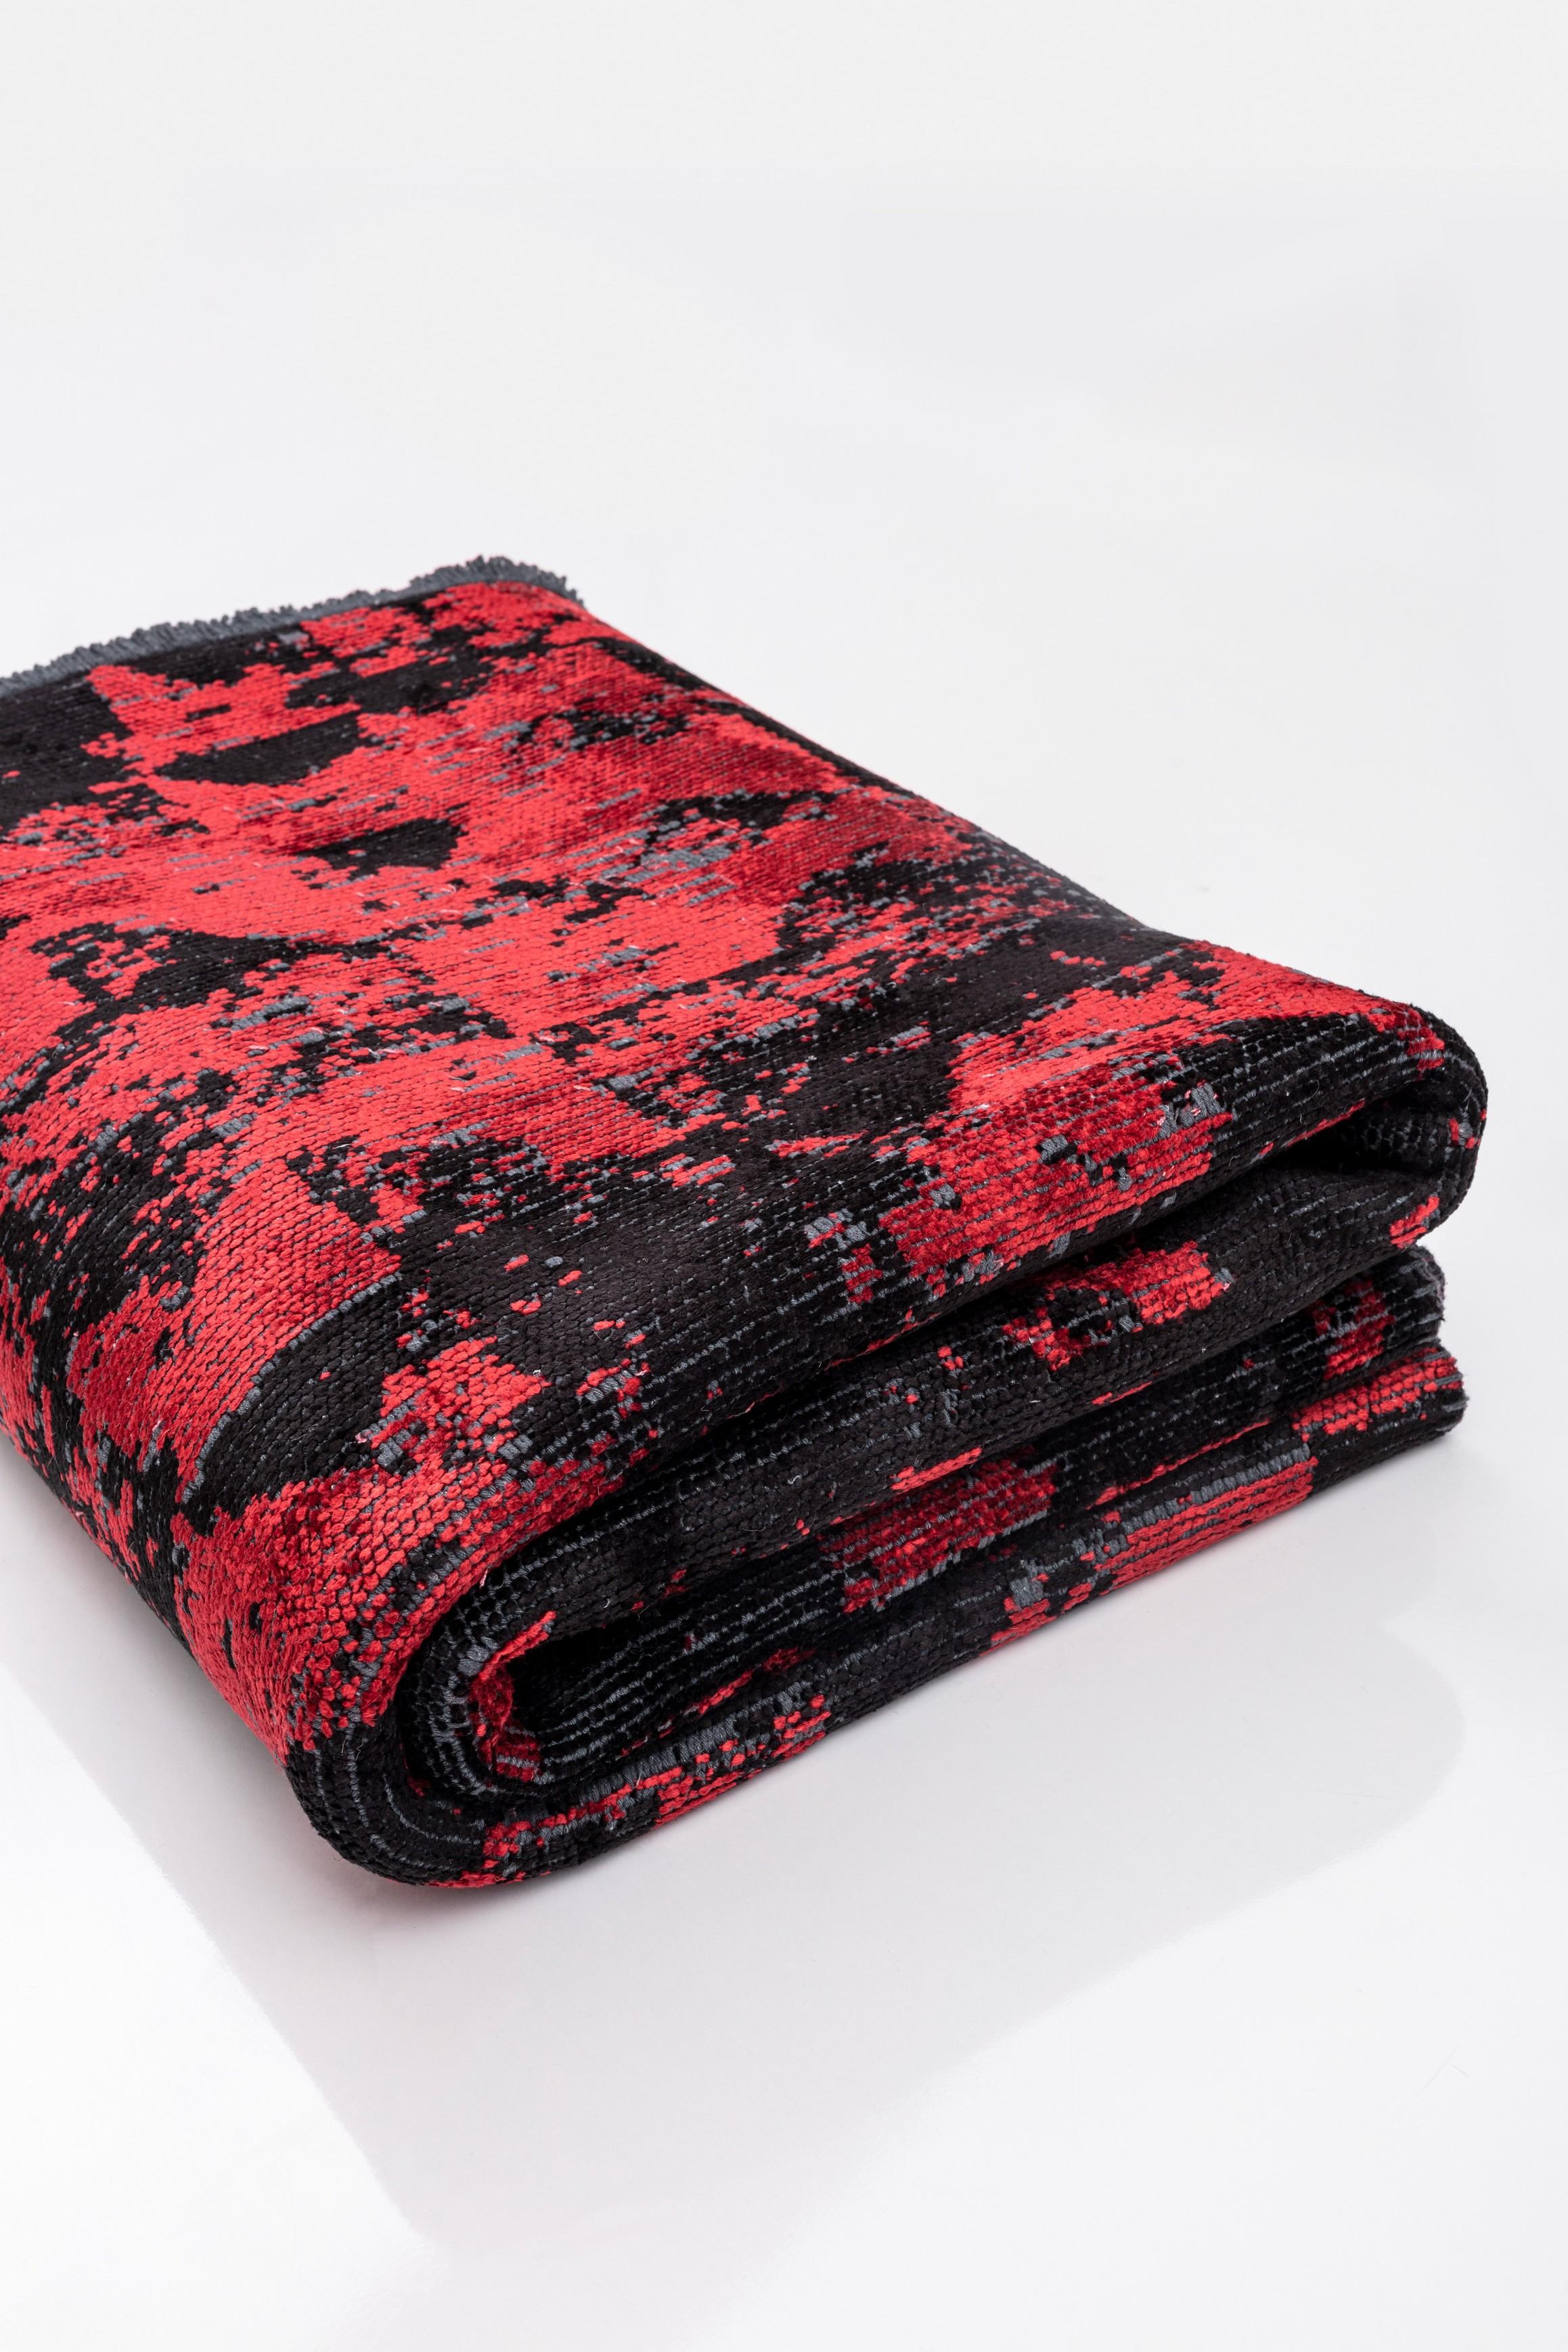 For Sale:  (Red) Modern Camouflage Luxury Hand-Finished Area Rug 4